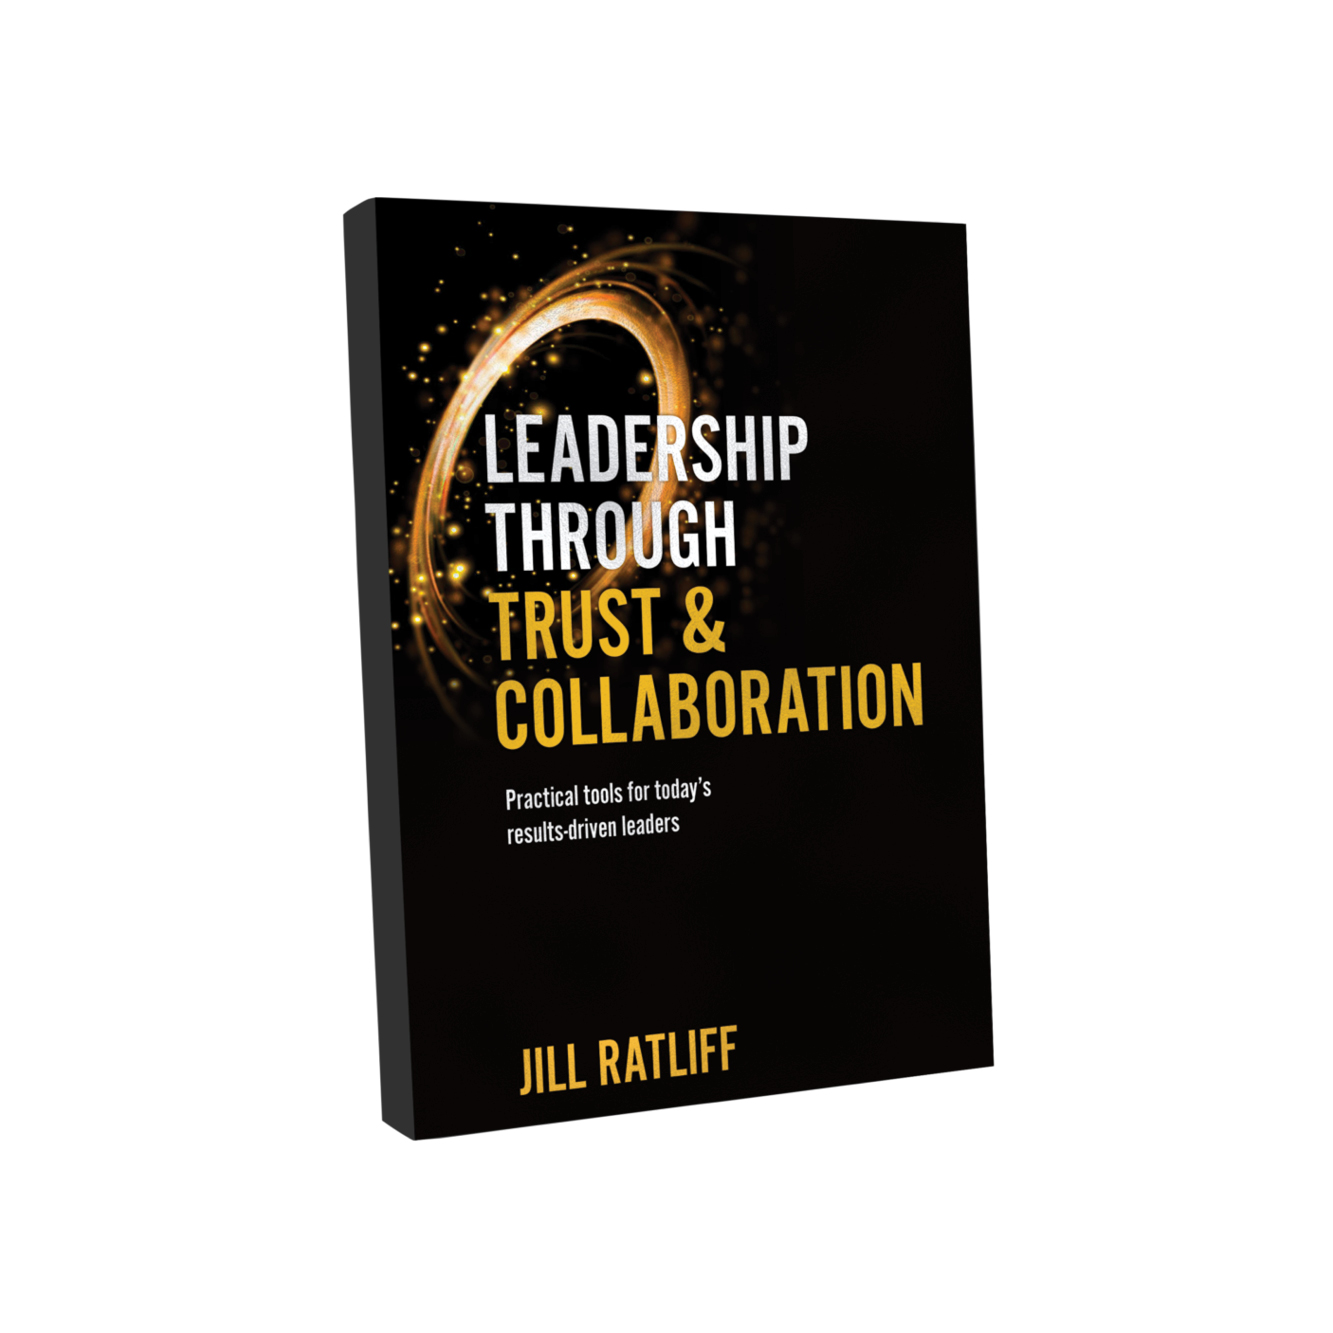 Leadership Through Trust & Collaboration Book Cover Mockup